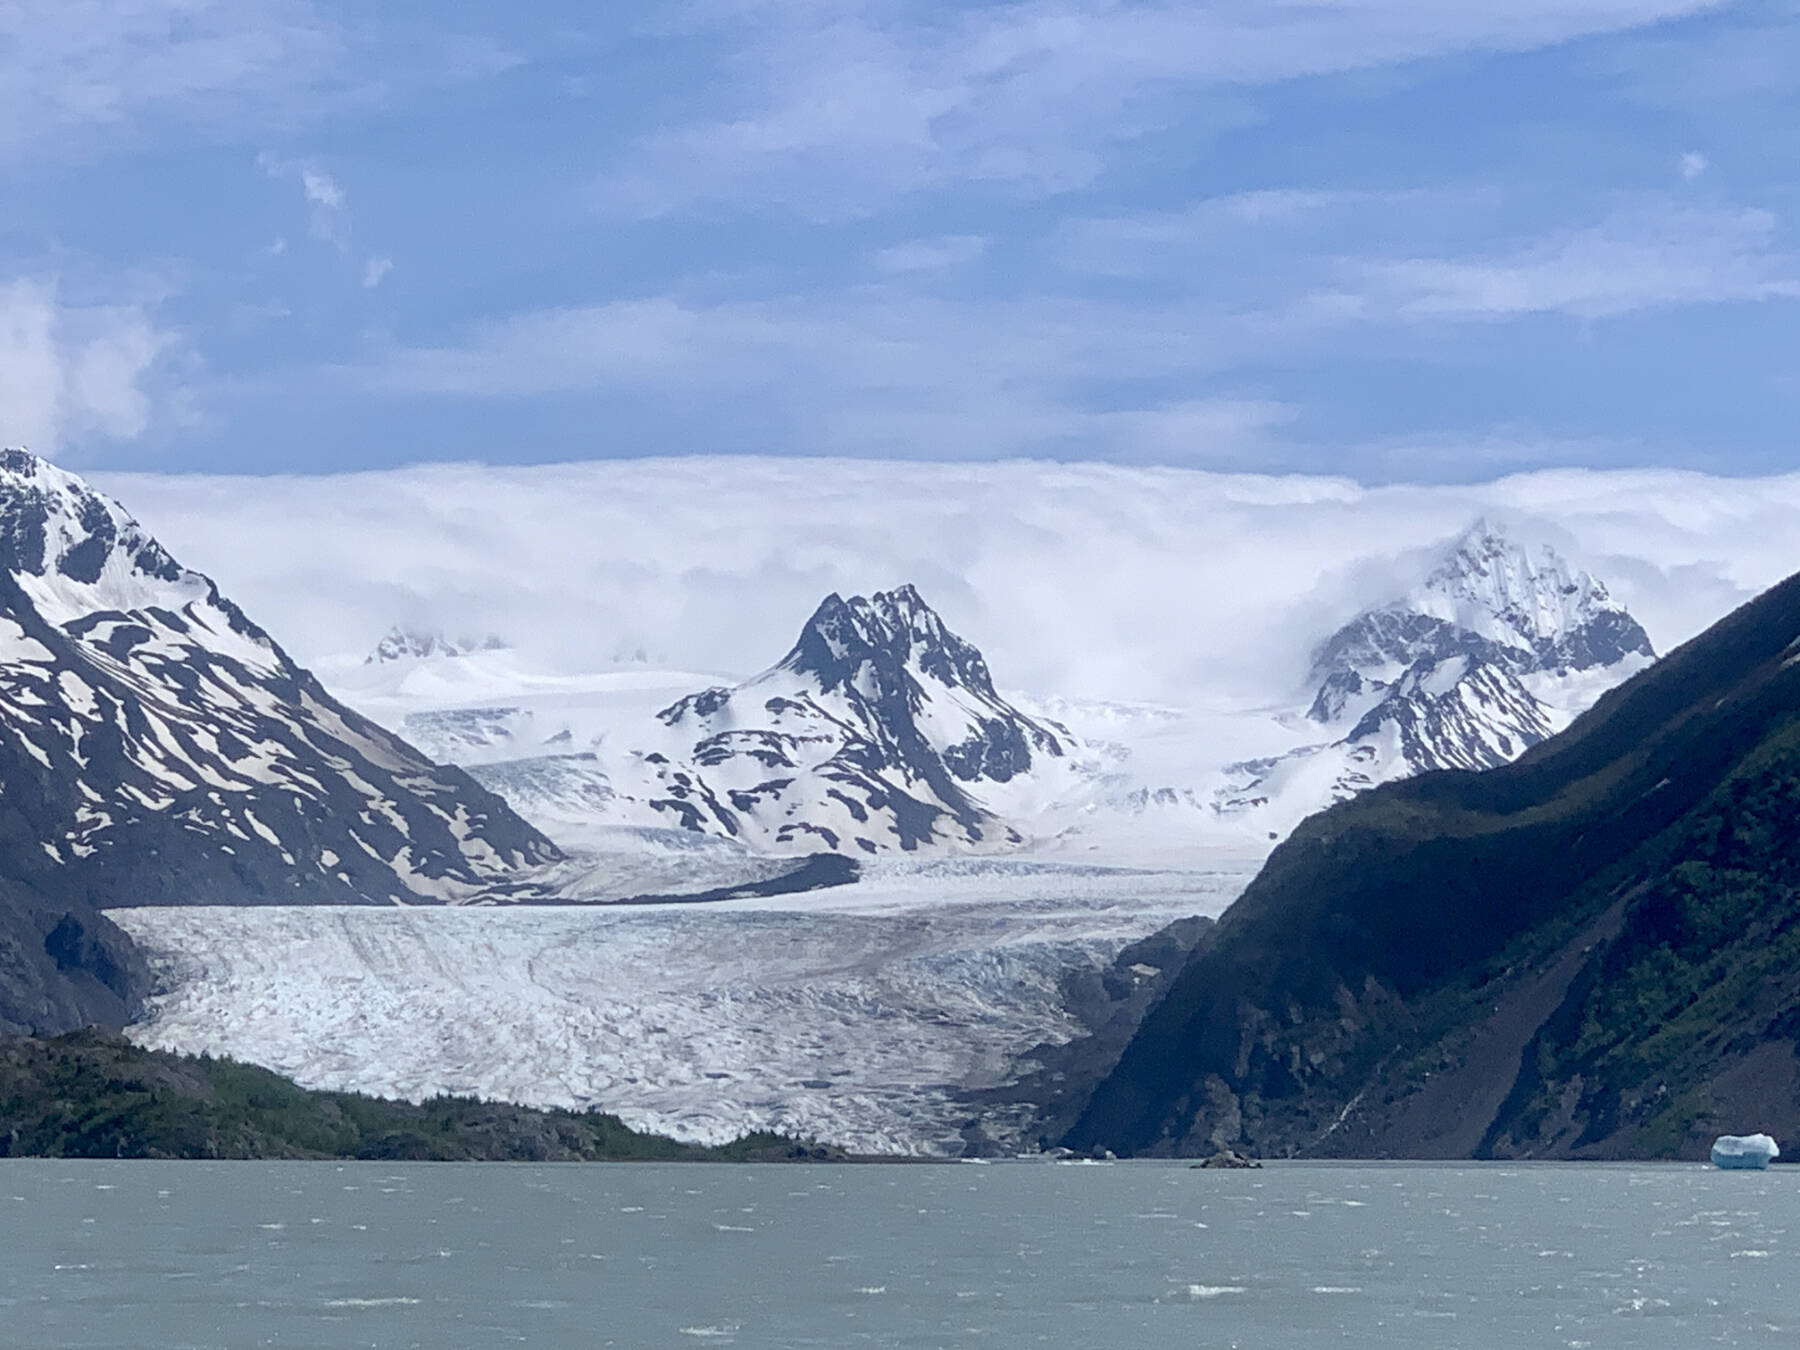 Grewingk Glacier and Lake is visible from the Glacier Lake Trail on Tuesday, June 13, 2023 in Homer, Alaska. Photo by Christina Whiting